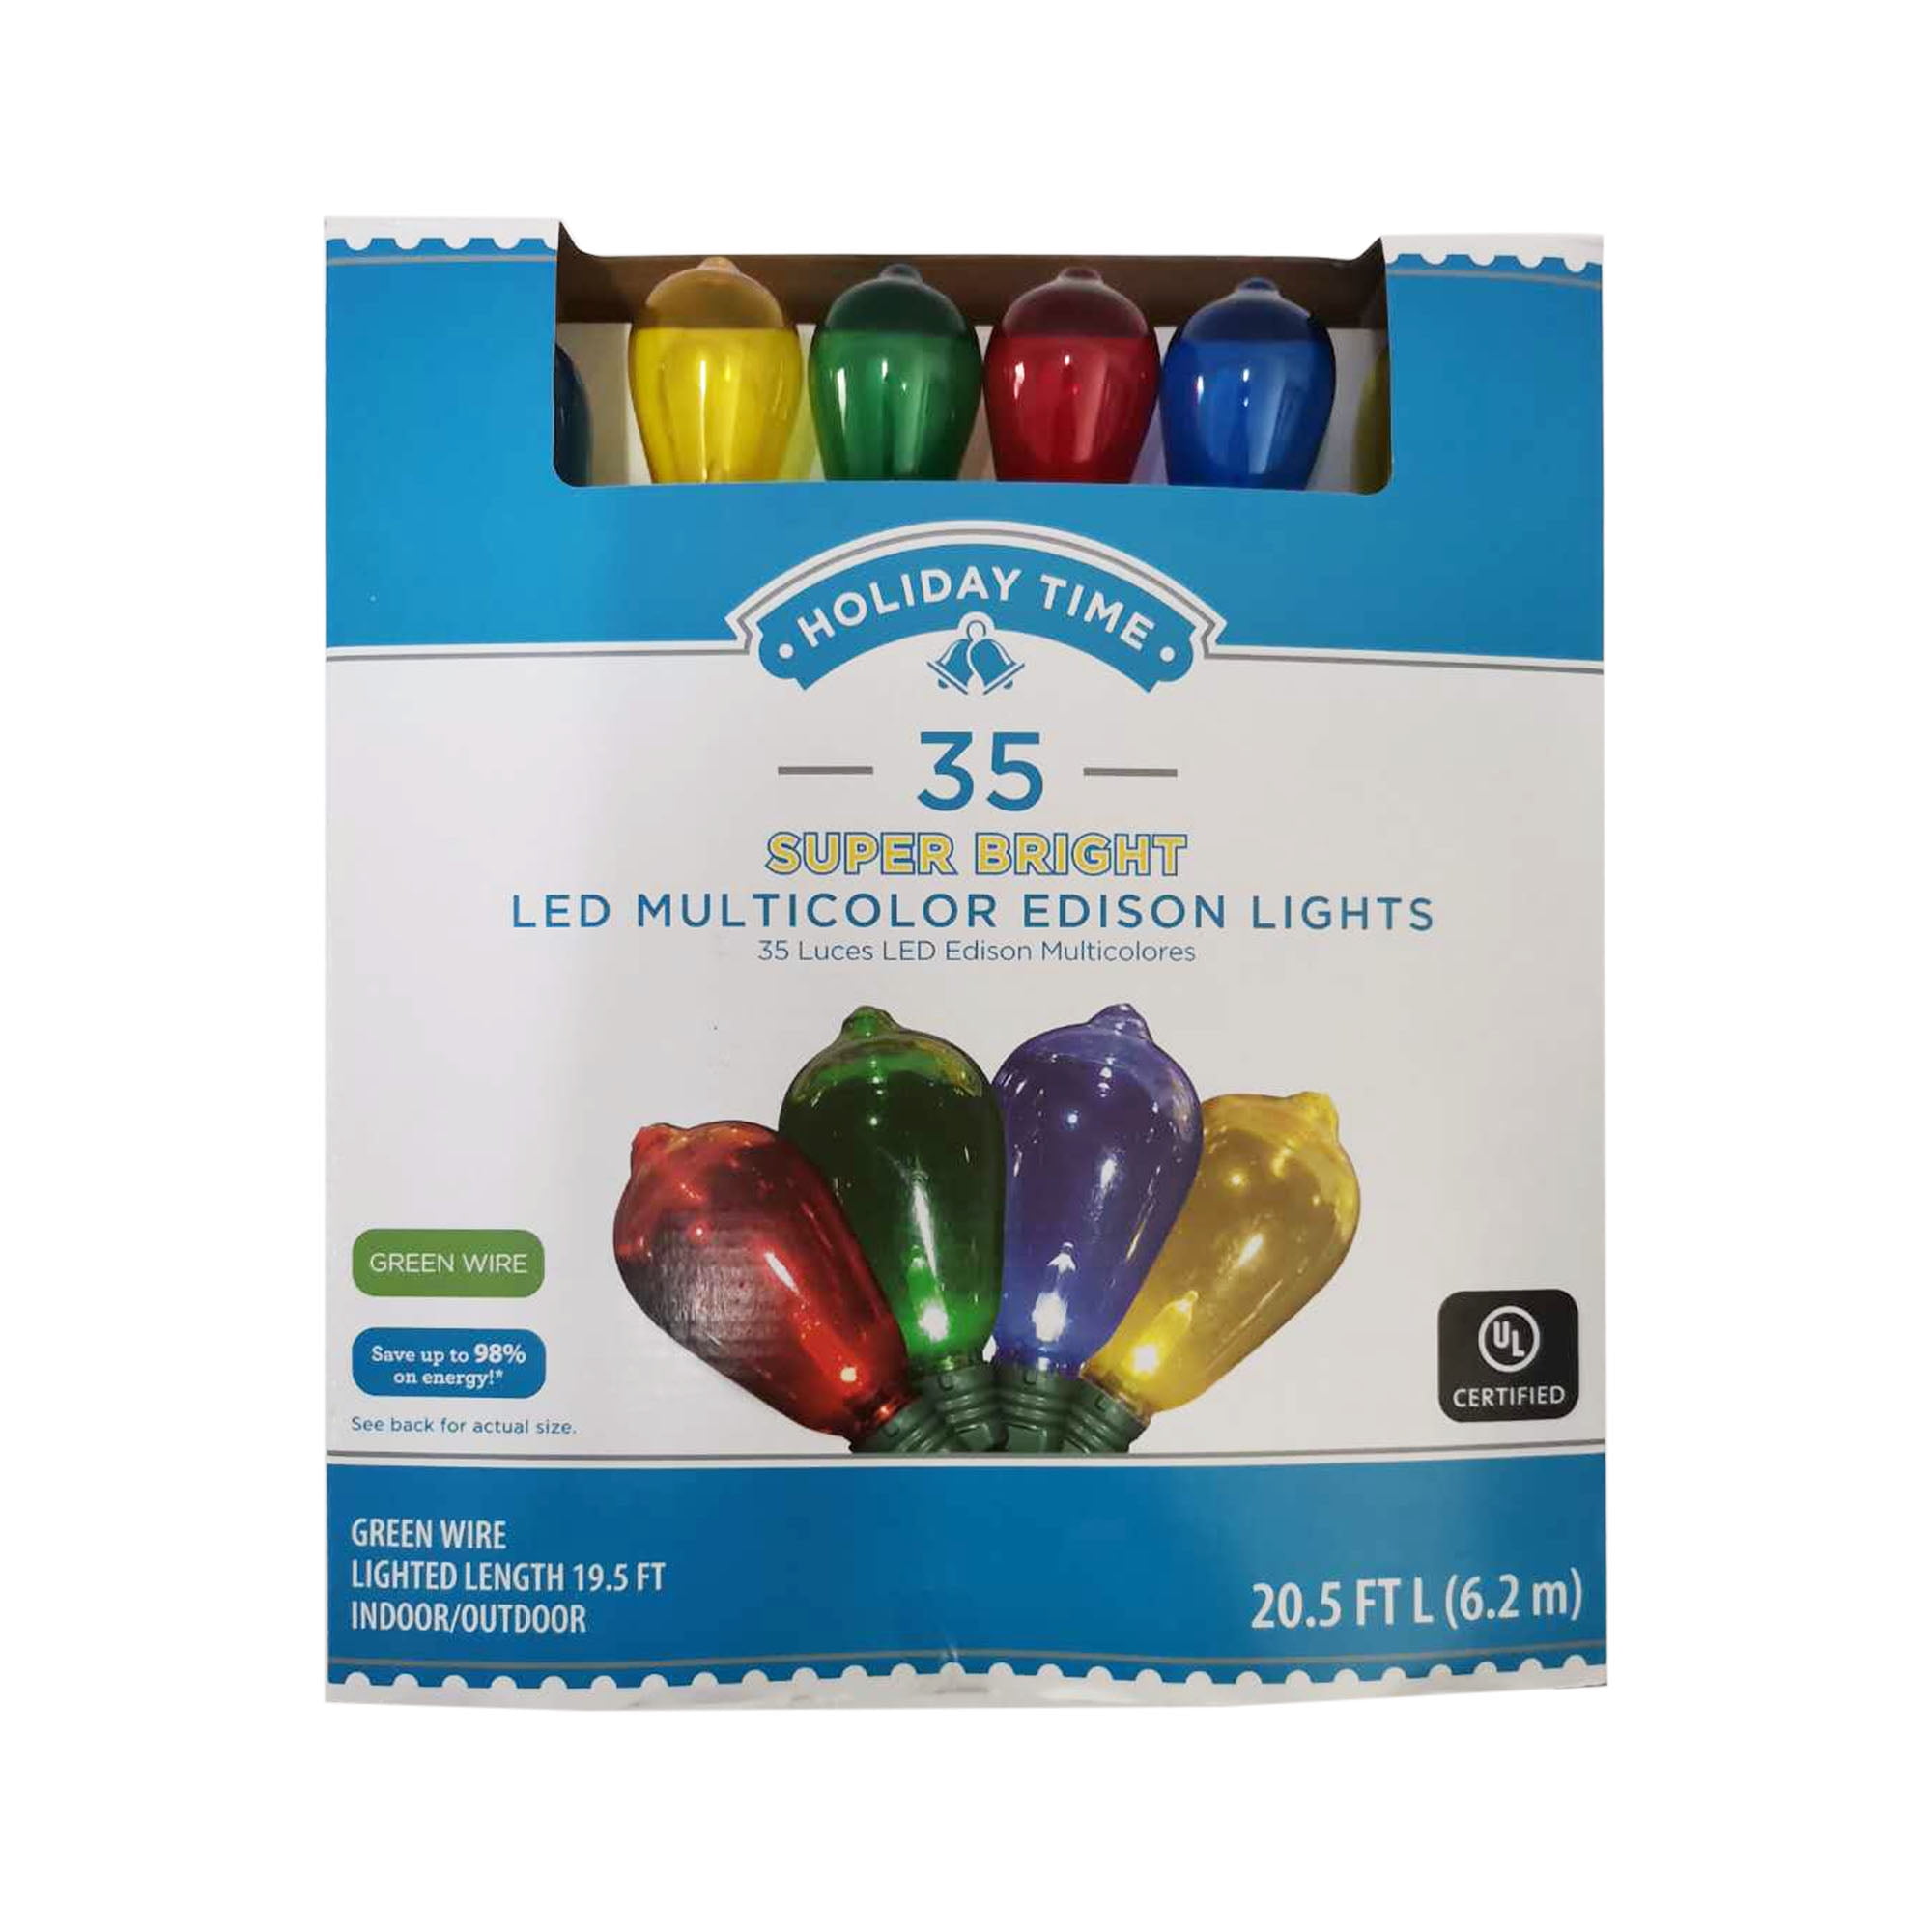 Holiday Time 25 Super Bright LED Ceramic Multi C7 Lights Christmas Green Wire 